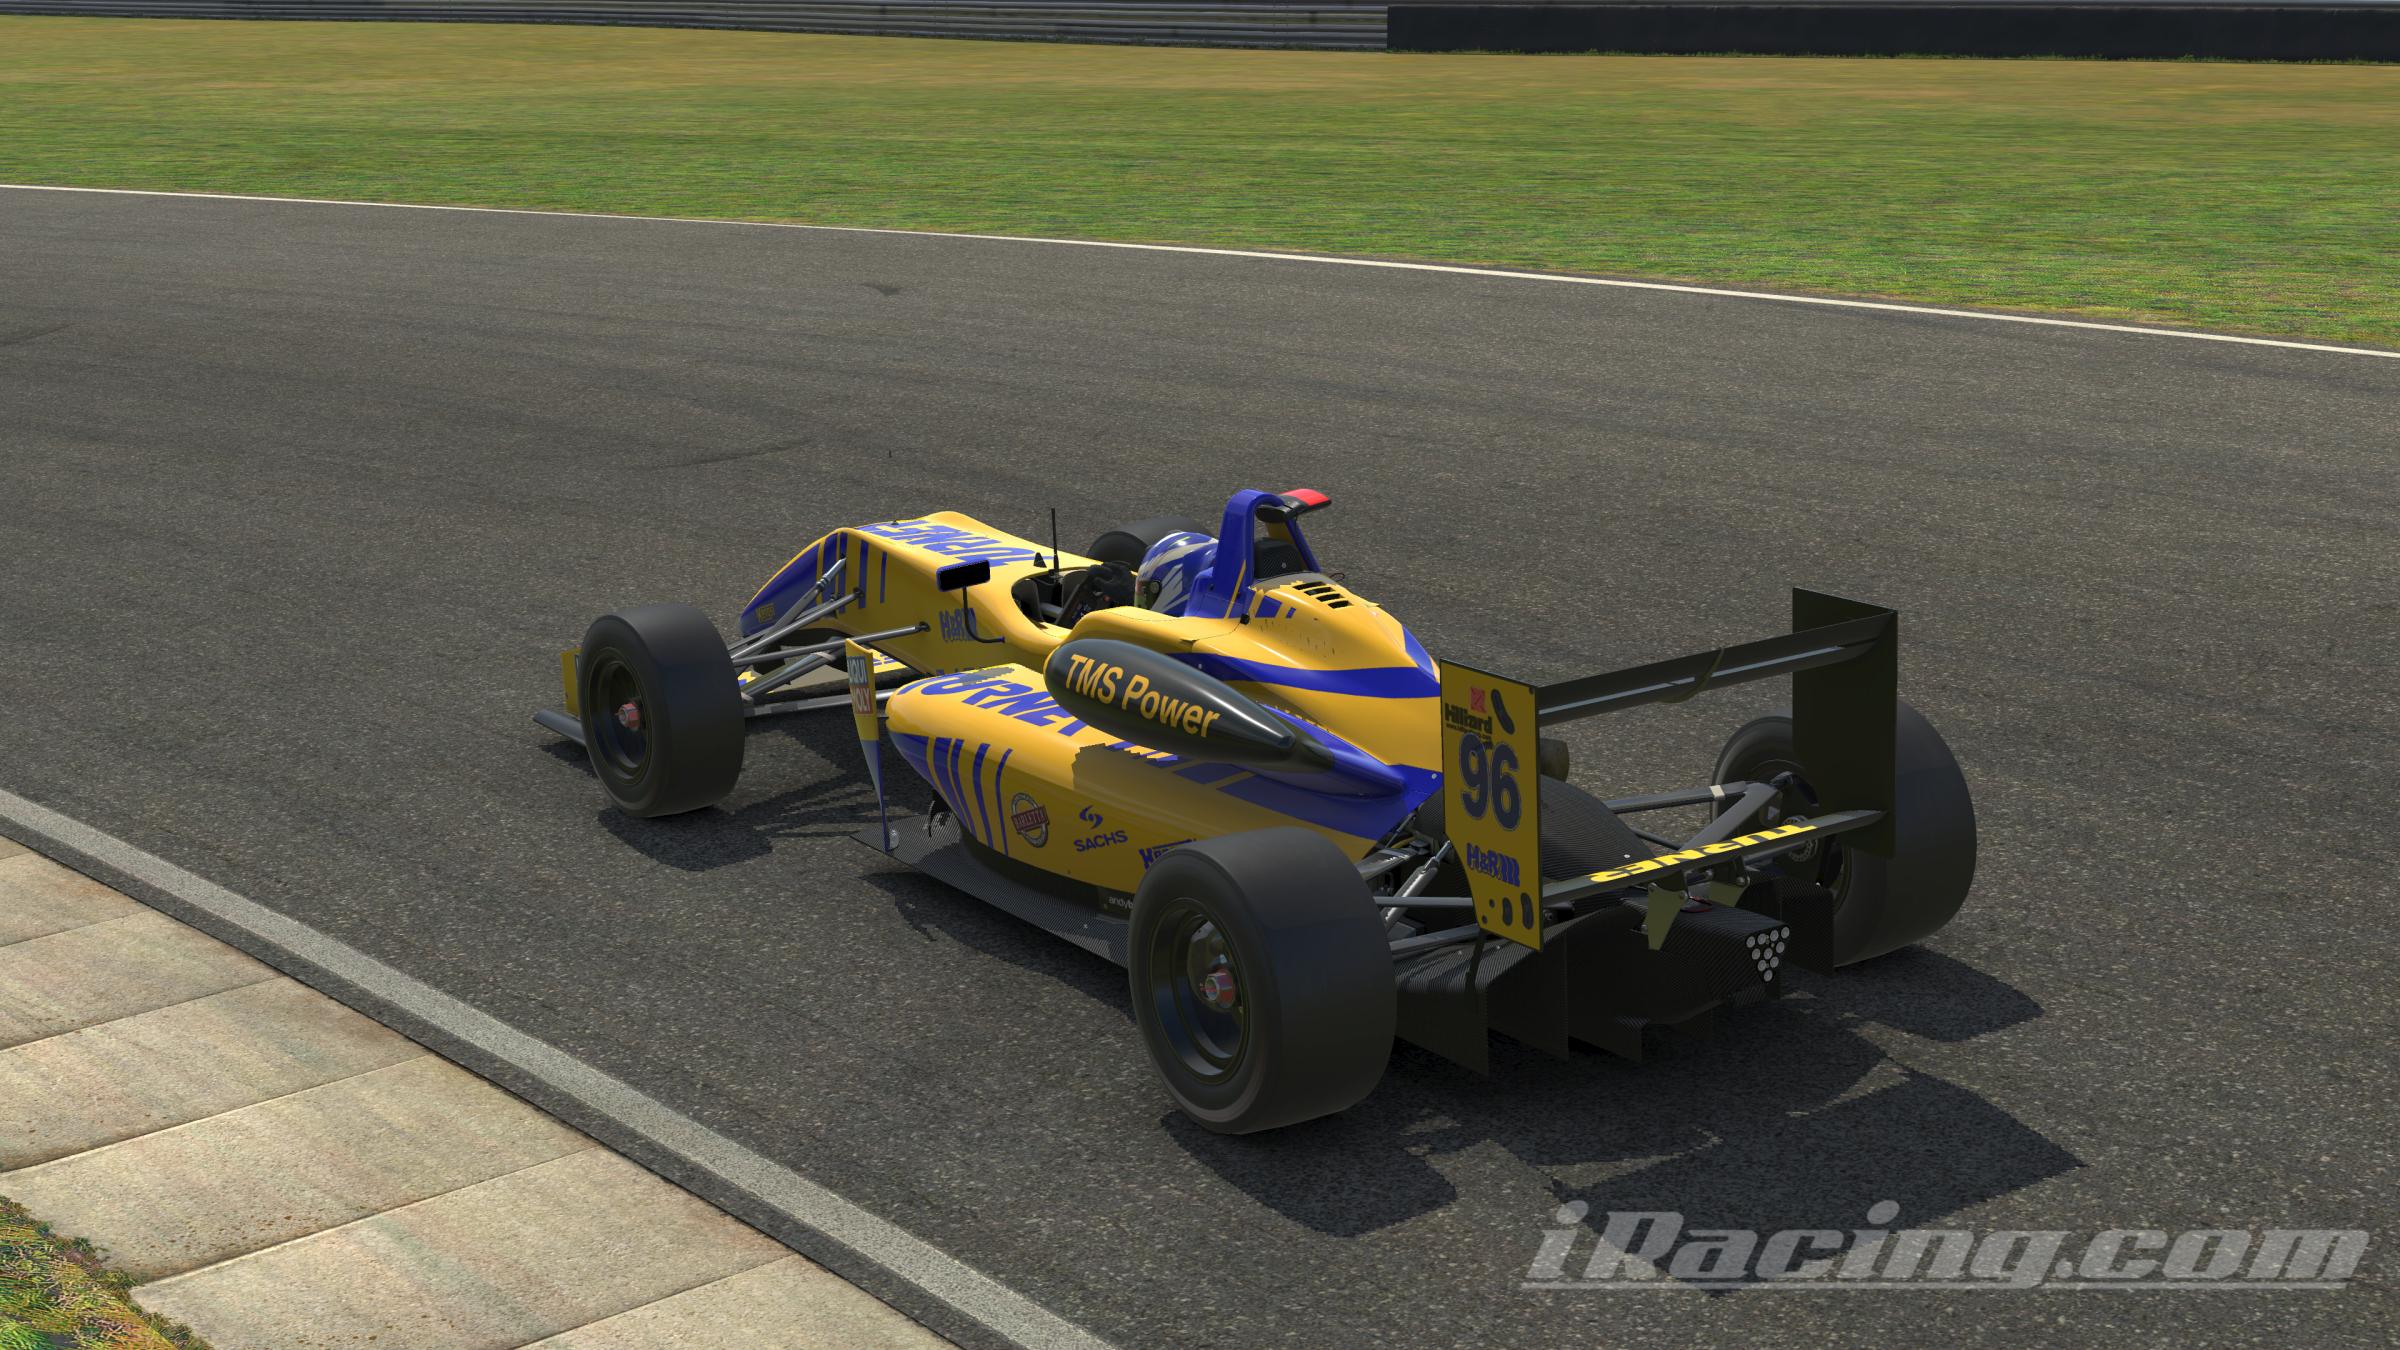 Preview of Dallara F312 F3 - TURNER MOTORSPORT by Andy Blackmore